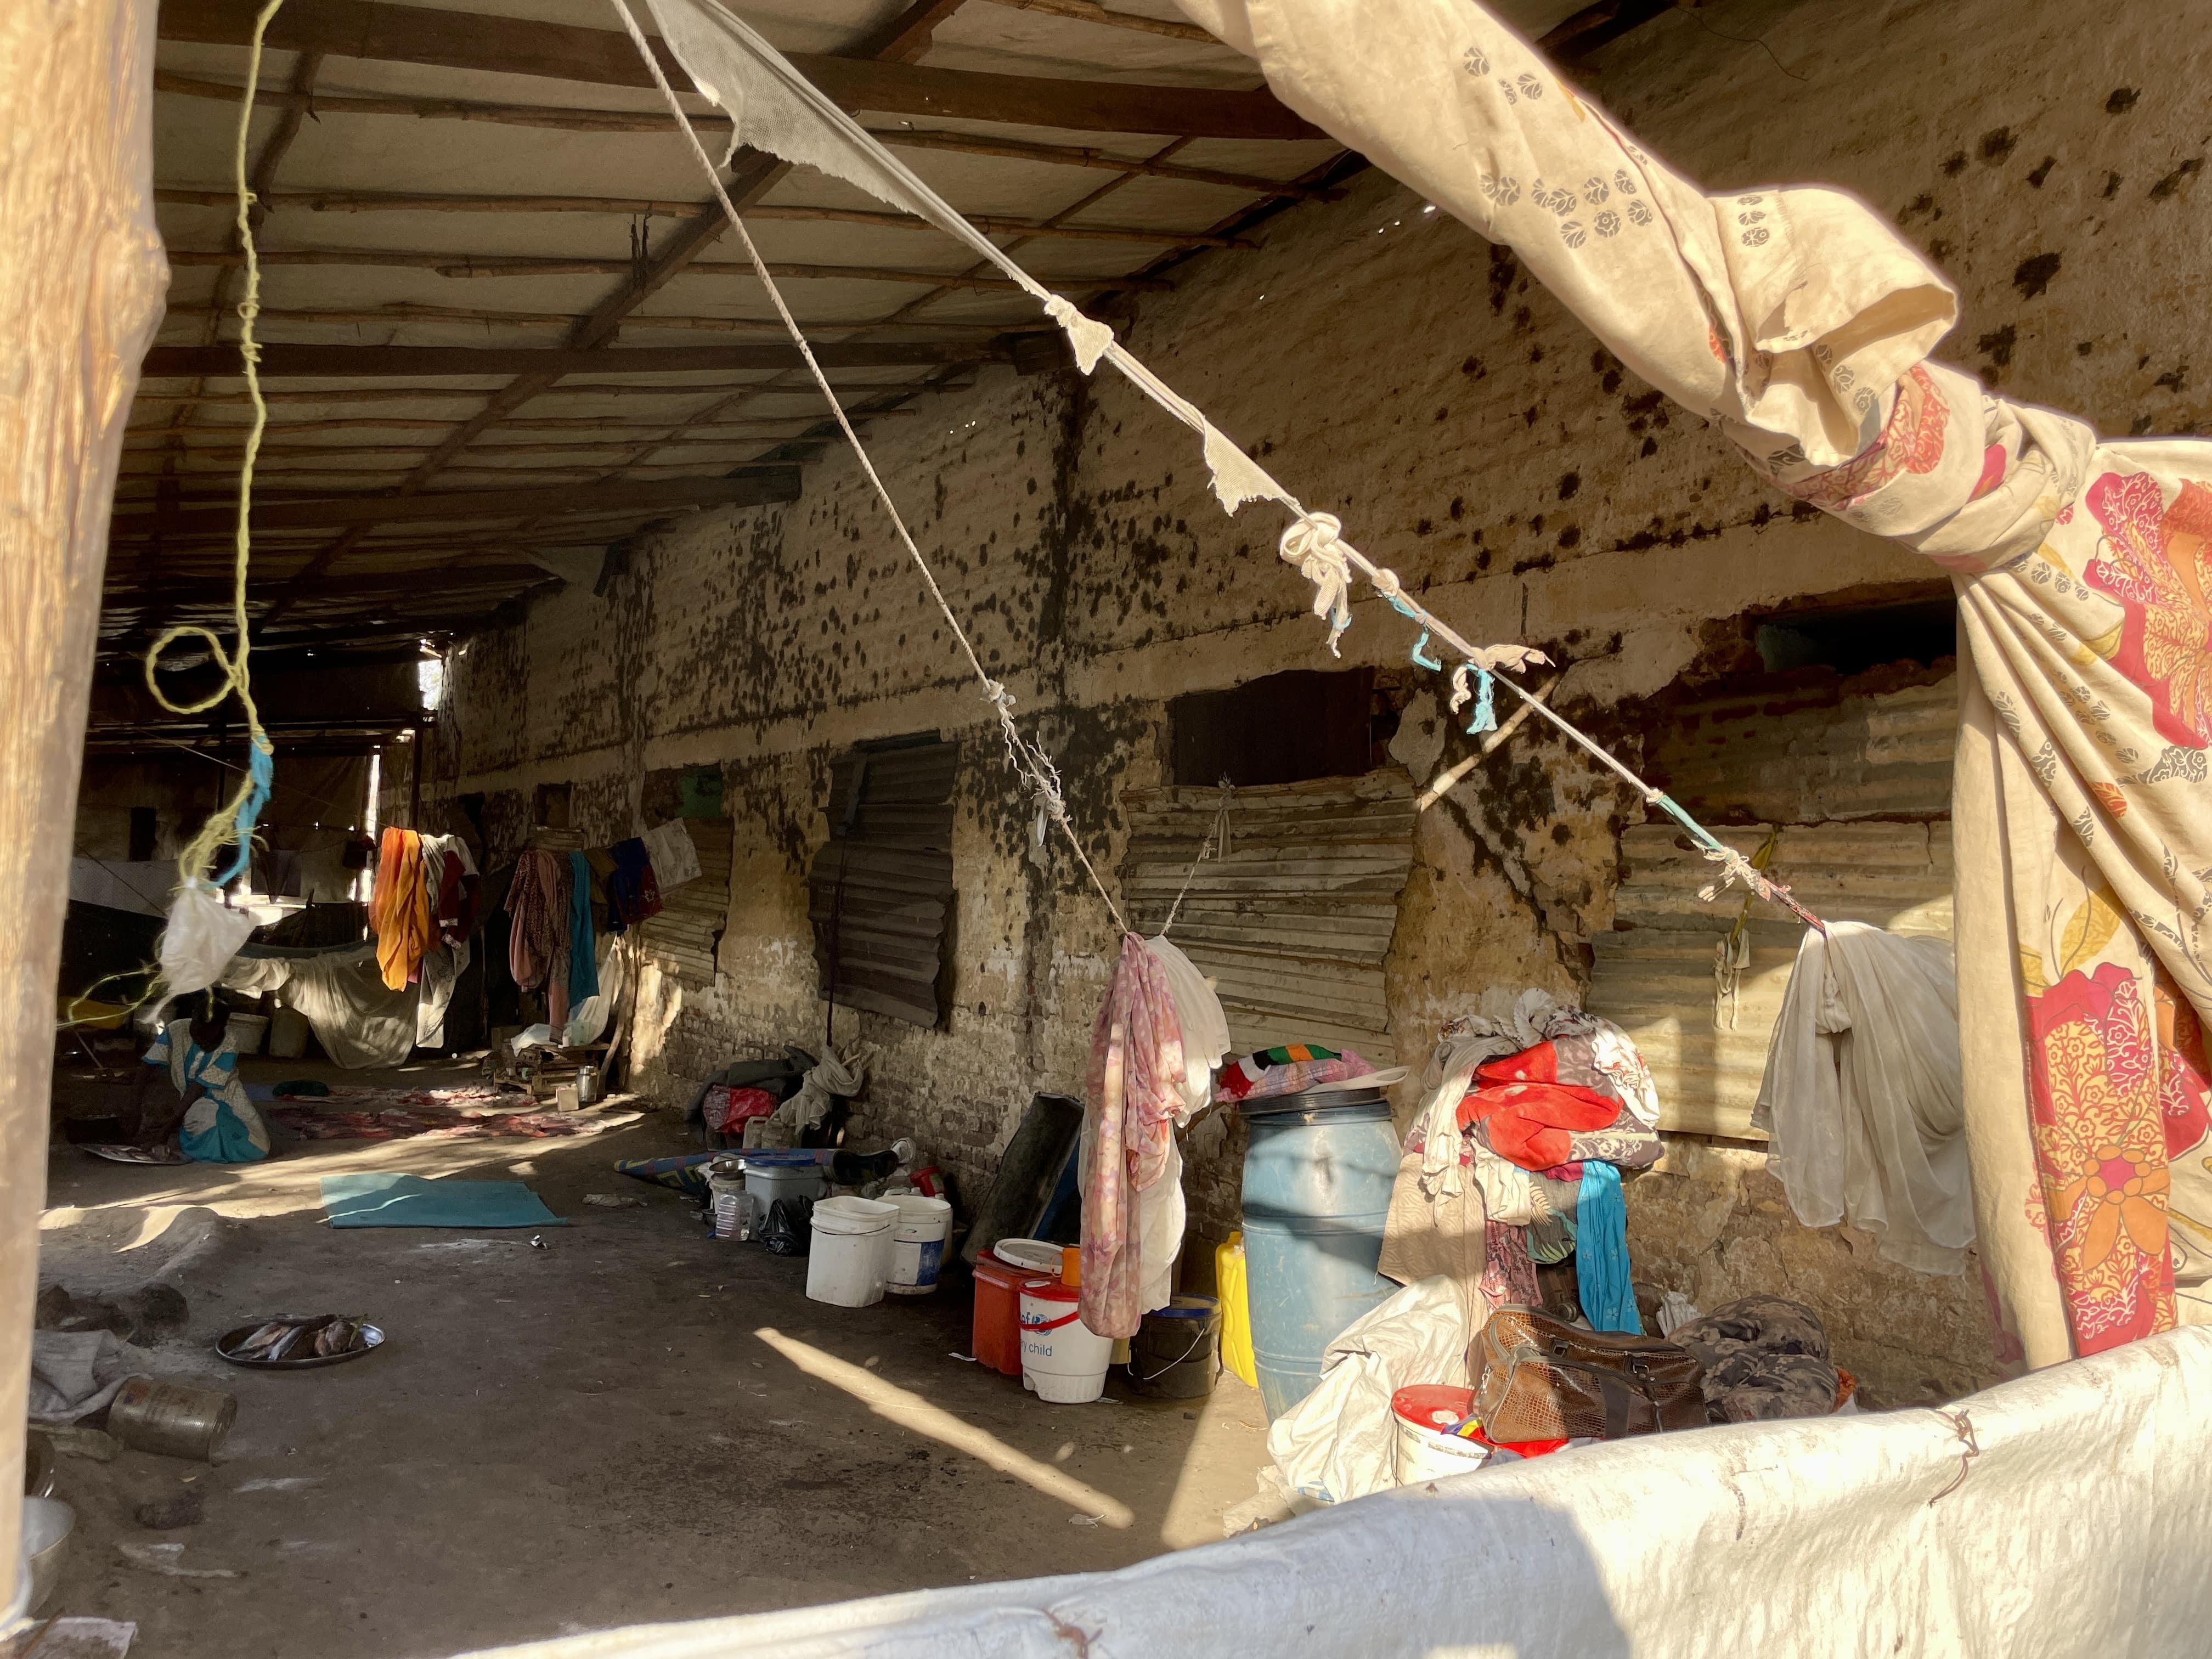 Sudan War & South Sudan Refugees: View inside a precarious shelter at Bulukat transit centre, where thousands of returnees from Sudan live.